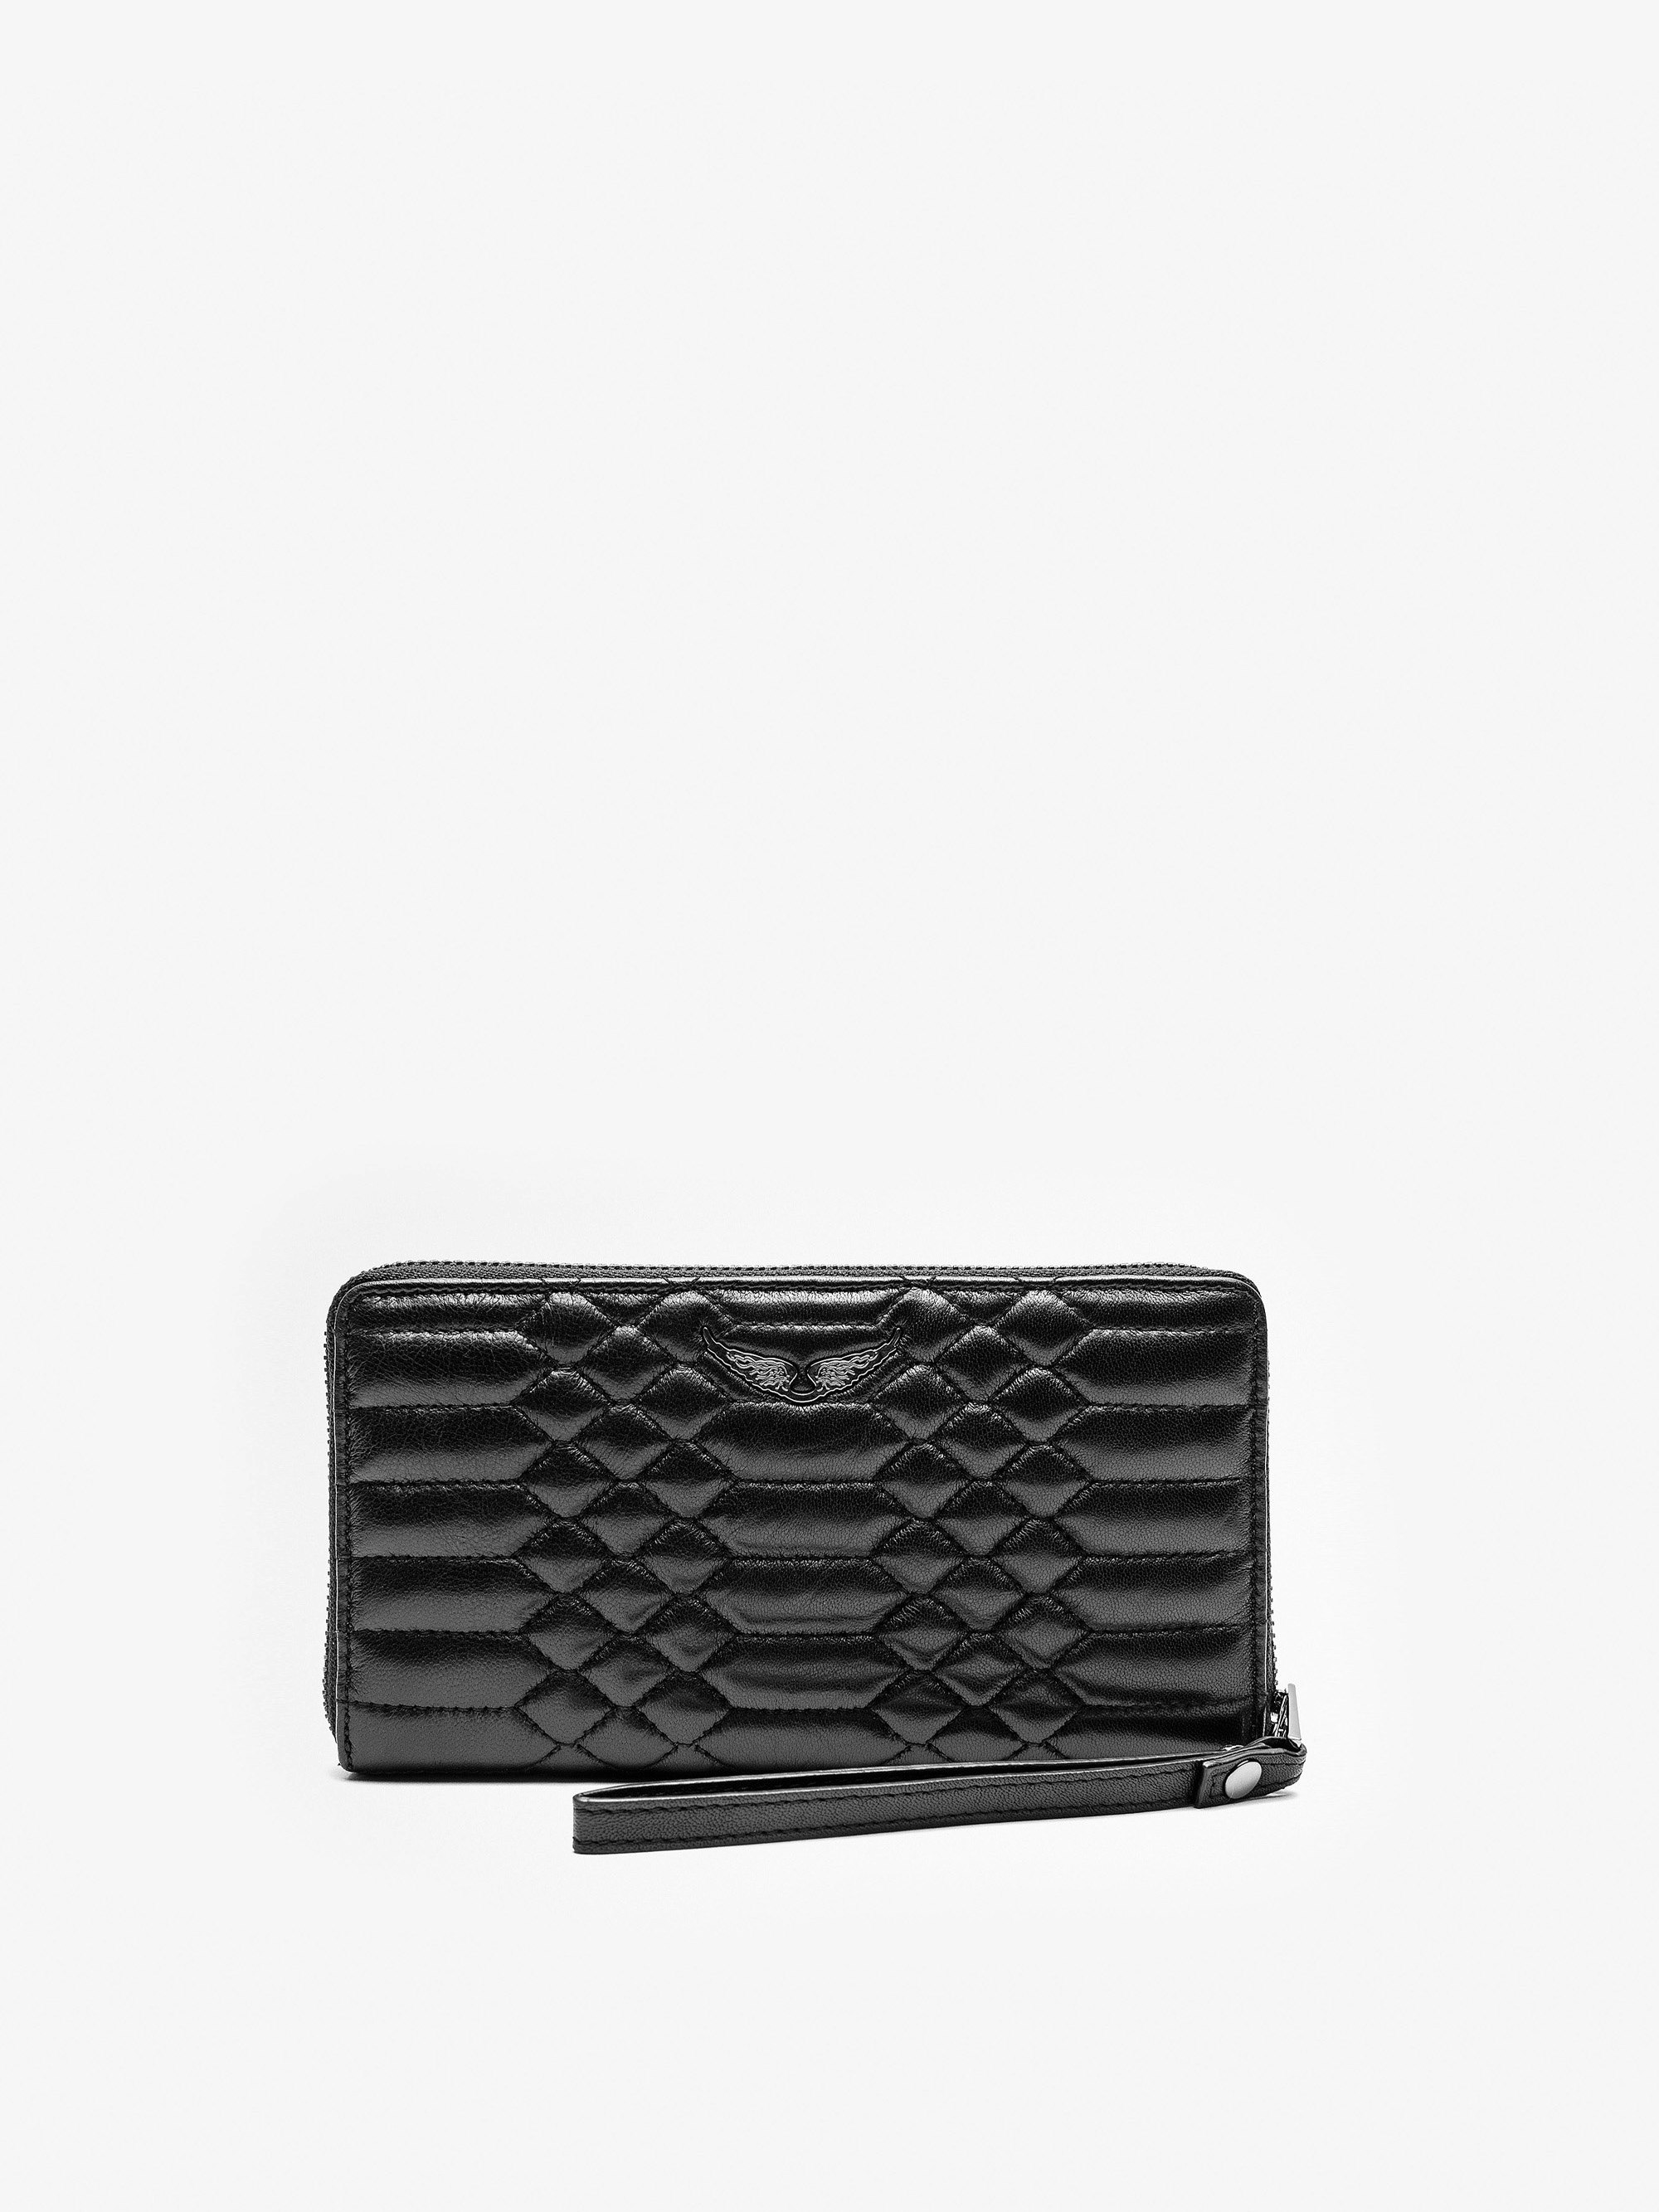 Compagnon Matelasse Wallet - Women’s black quilted leather wallet.